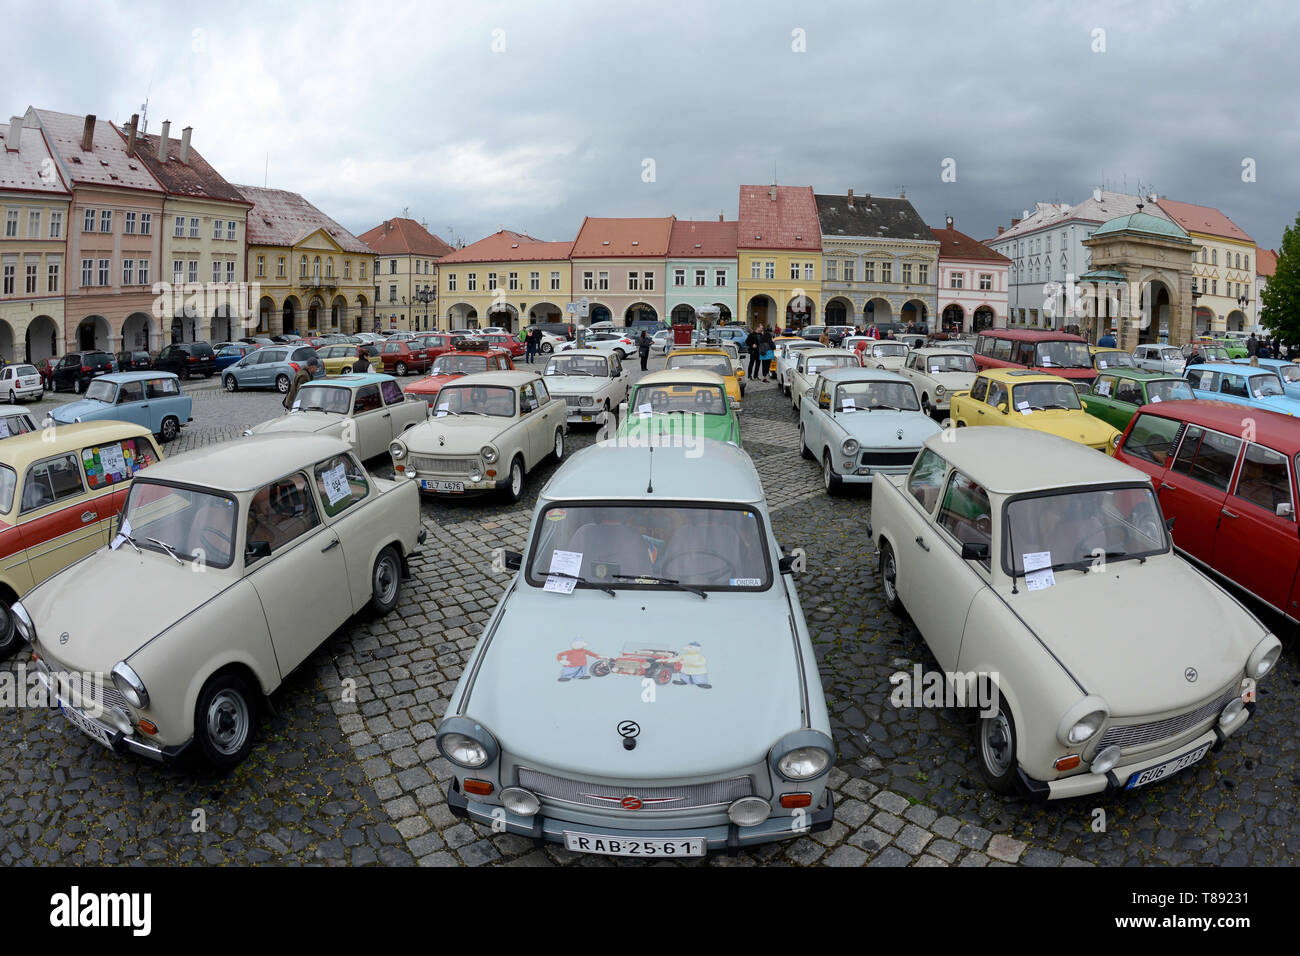 Jicin, Czech Republic. 11th May, 2019. International Meeting of Trabant drivers which is expected to attract more than 220 vehicles of the communist era cars will be meeting in the city Jicin in the Bohemian Paradise. The Trabant is a car that was produced by former East German auto maker VEB Sachsenring Automobilwerke Zwickau in Zwickau. It was the most common vehicle in East Germany, and was also exported to countries both inside and outside the Eastern Bloc. Due to its outdated and inefficient two-stroke engine (which produced poor fuel economy for its low power output and thick, smoky ex C Stock Photo